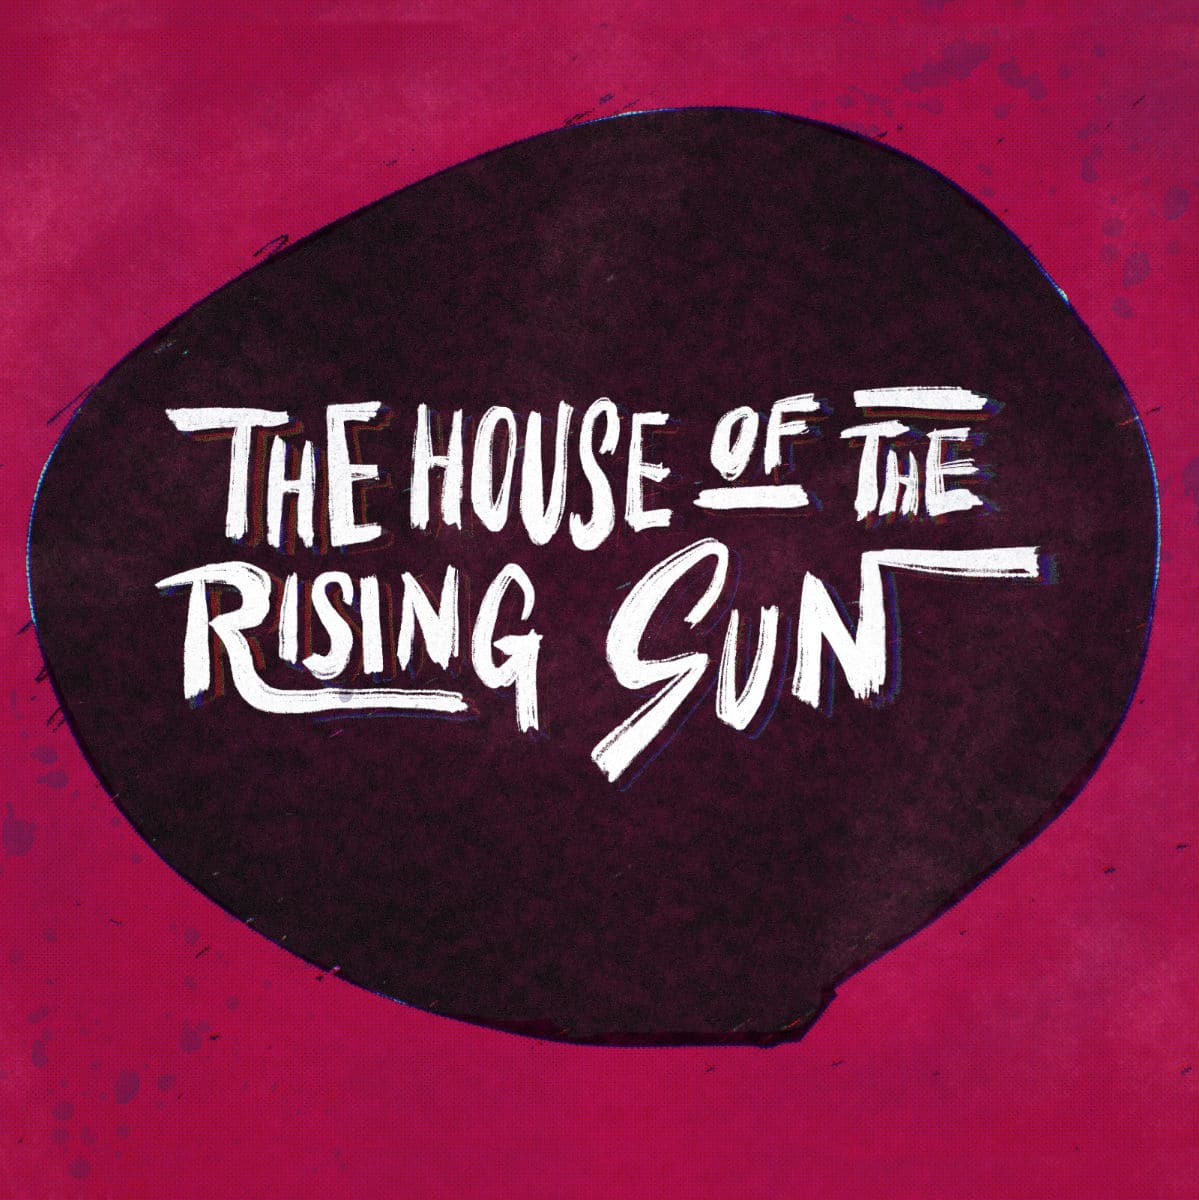 The House Of The Rising Sun – Lettering Michael Leonhartsberger